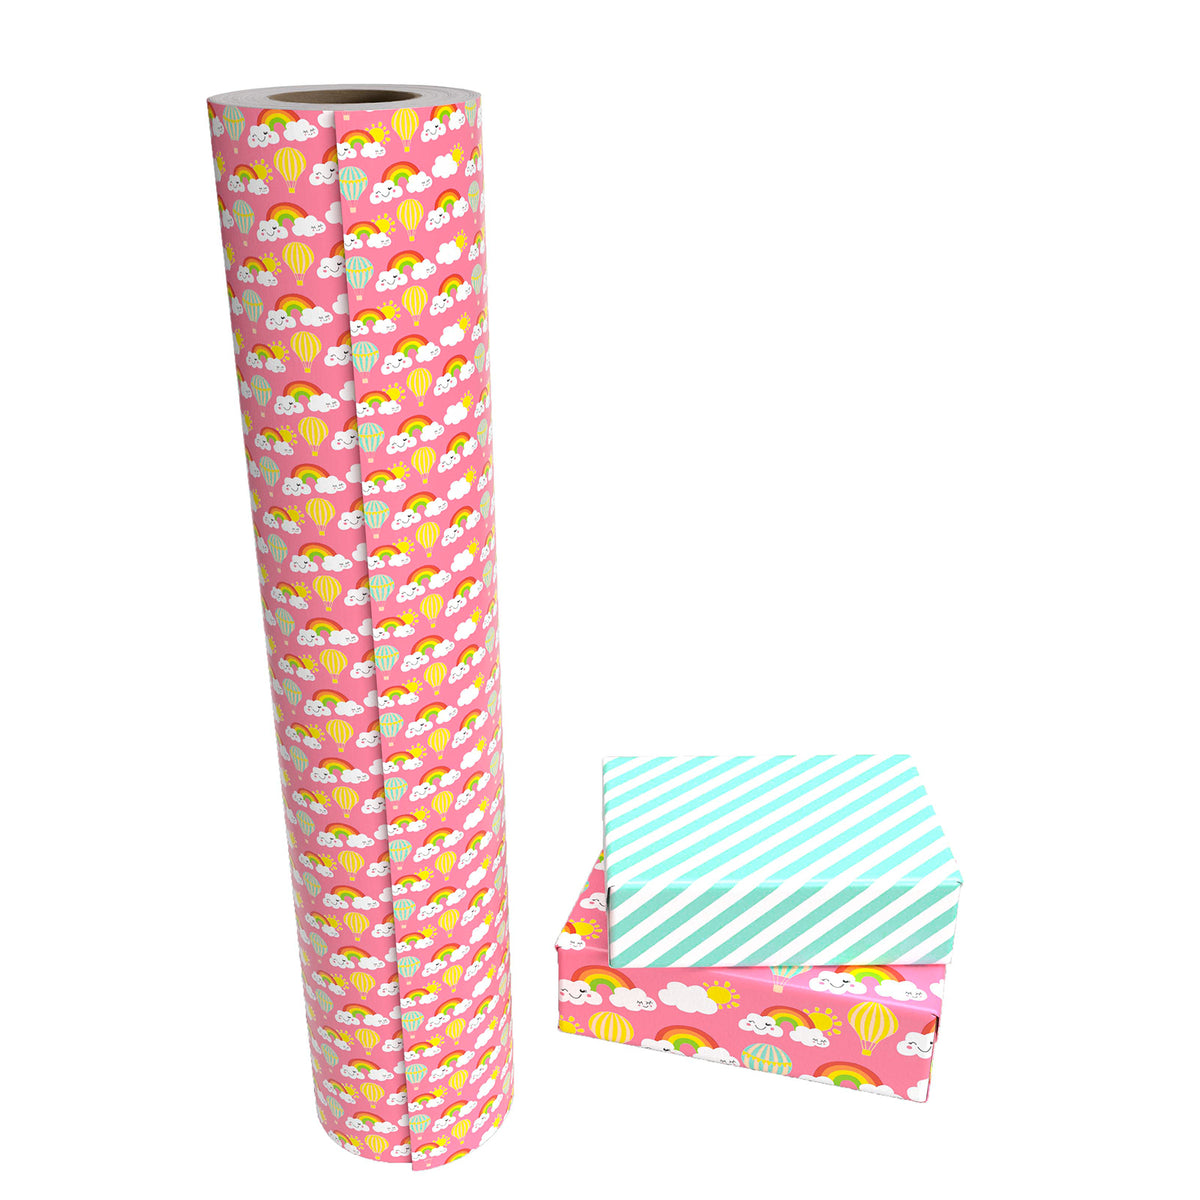 WRAPAHOLIC Wrapping Paper Roll - 30 Inch X 100 Feet Jumbo Roll Passionate  Red for Birthday, Holiday, Wedding, Baby Shower and More Occasions